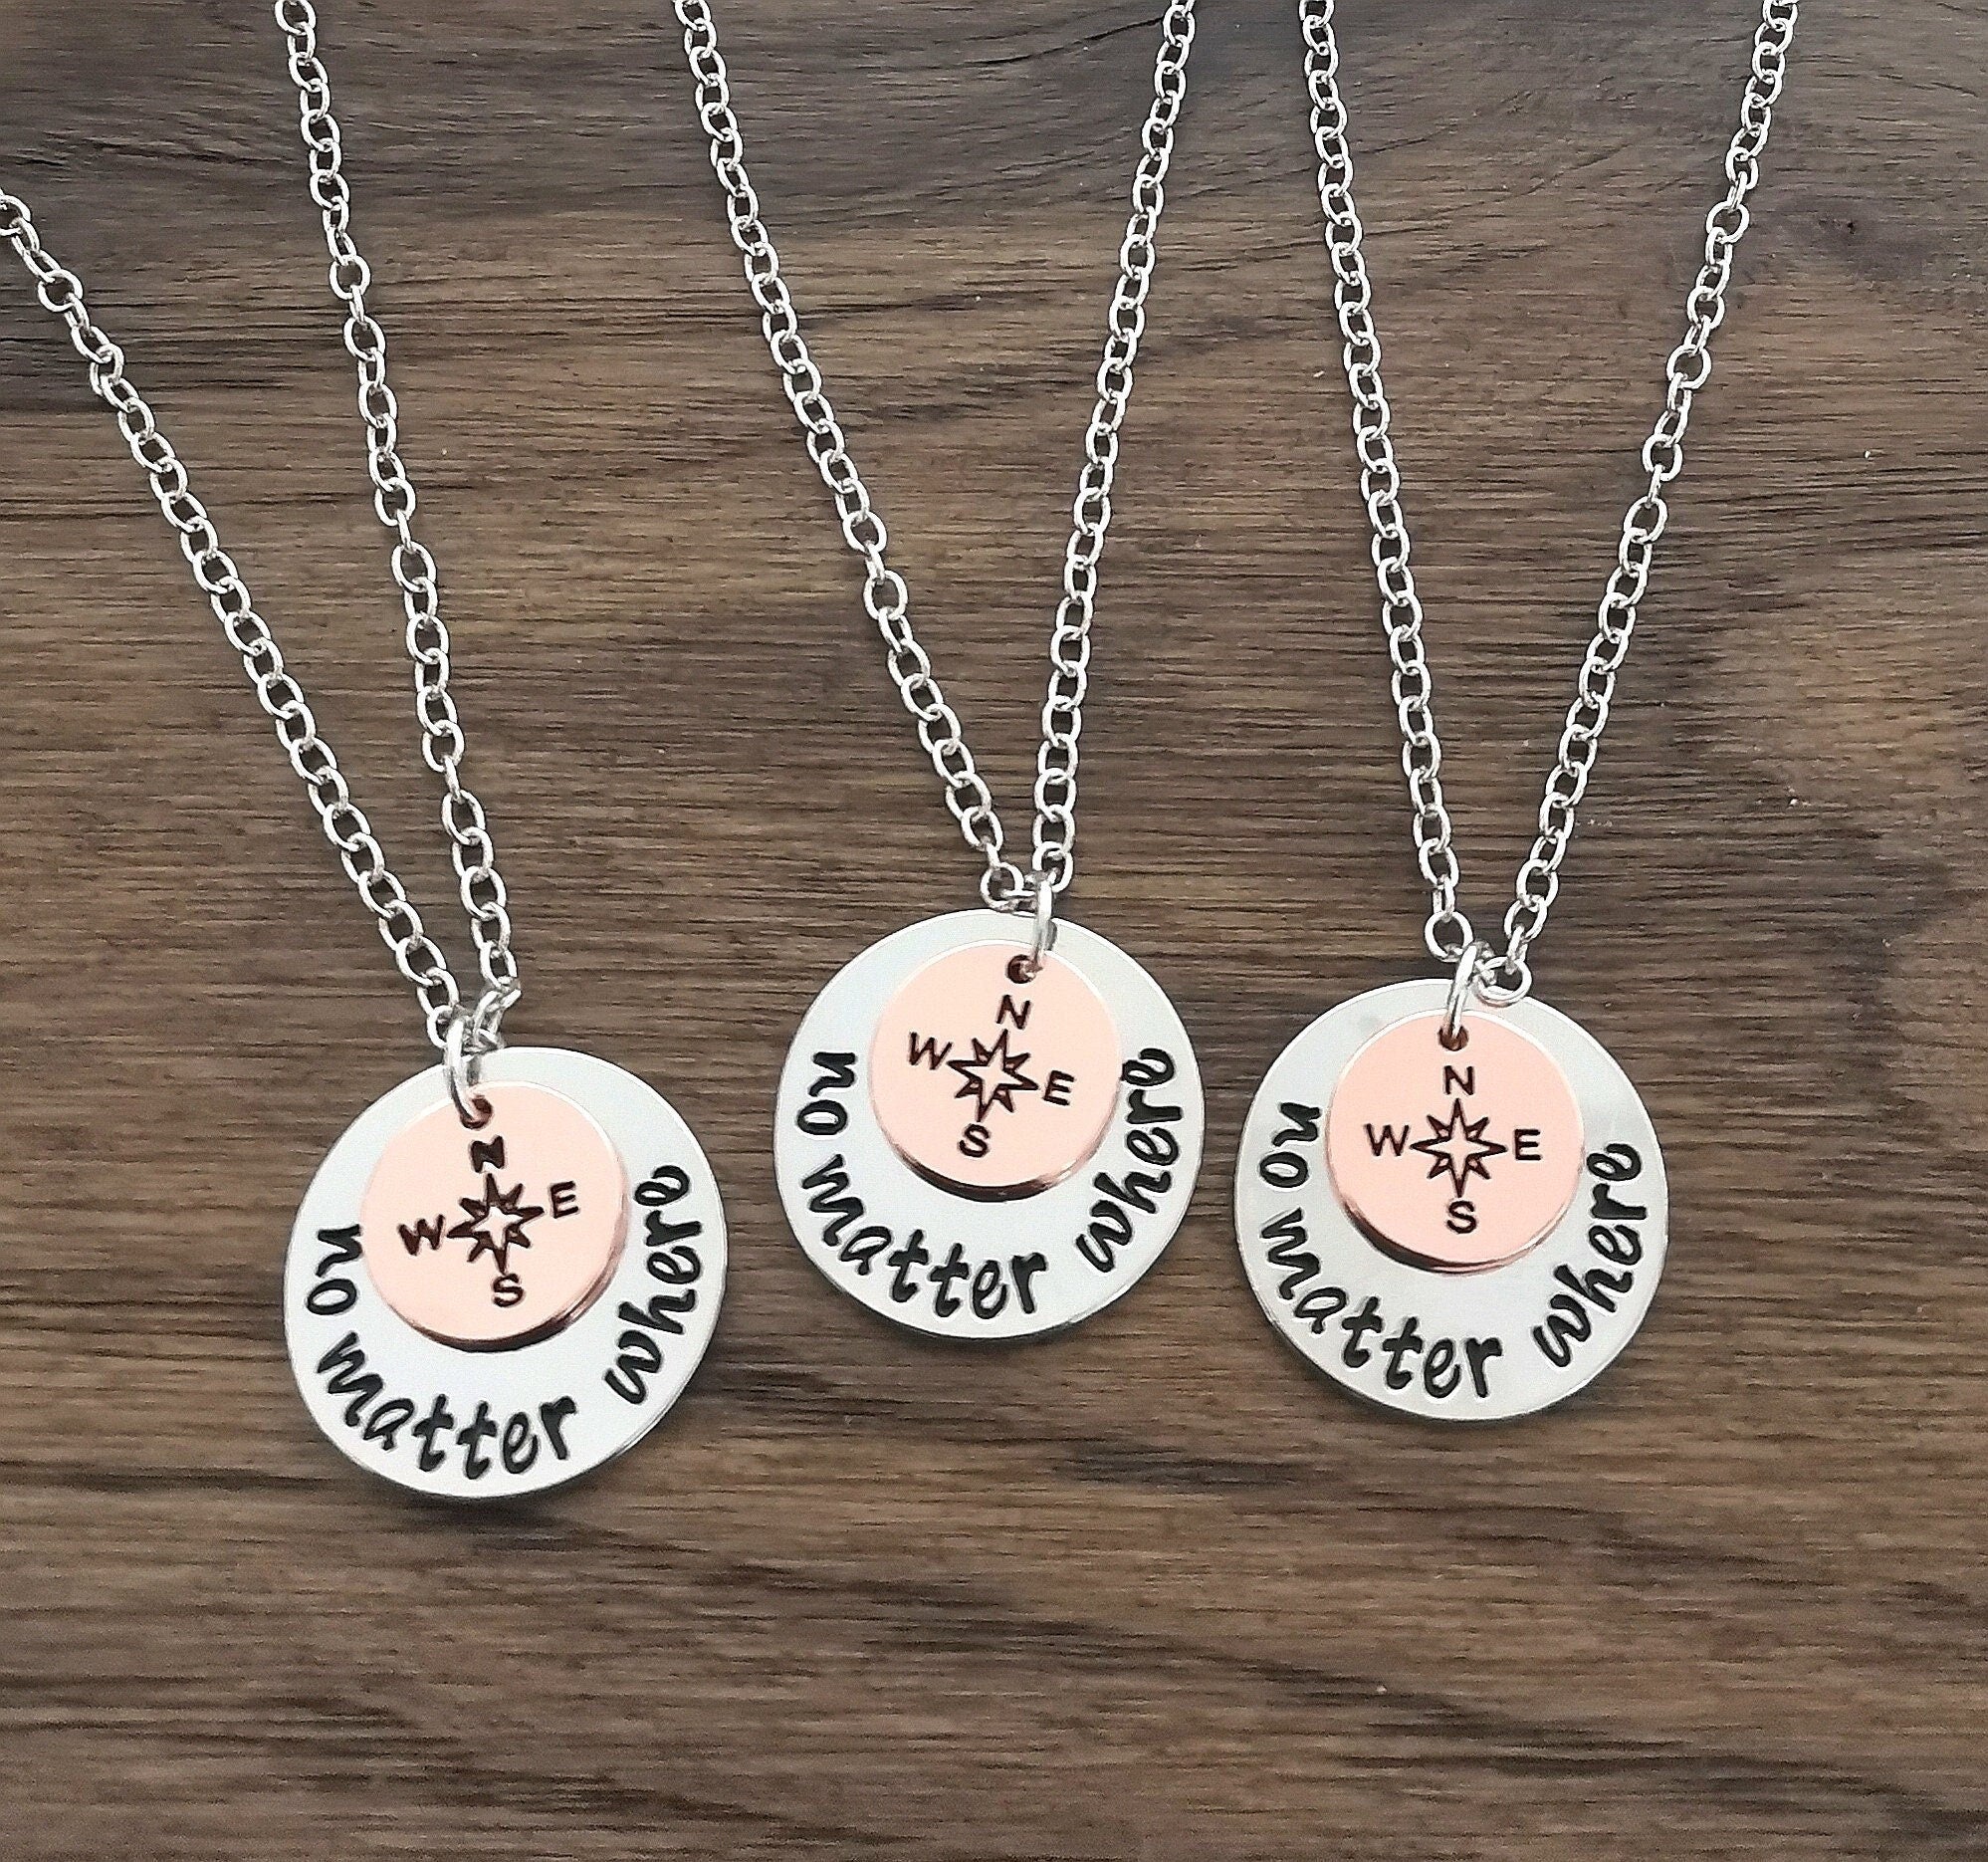 Best Friend Necklace for 3, Friendship necklace for 3, 3 best friend necklace, 3 Way Friendship necklace, 3 person, Three way, Bff, Sisters